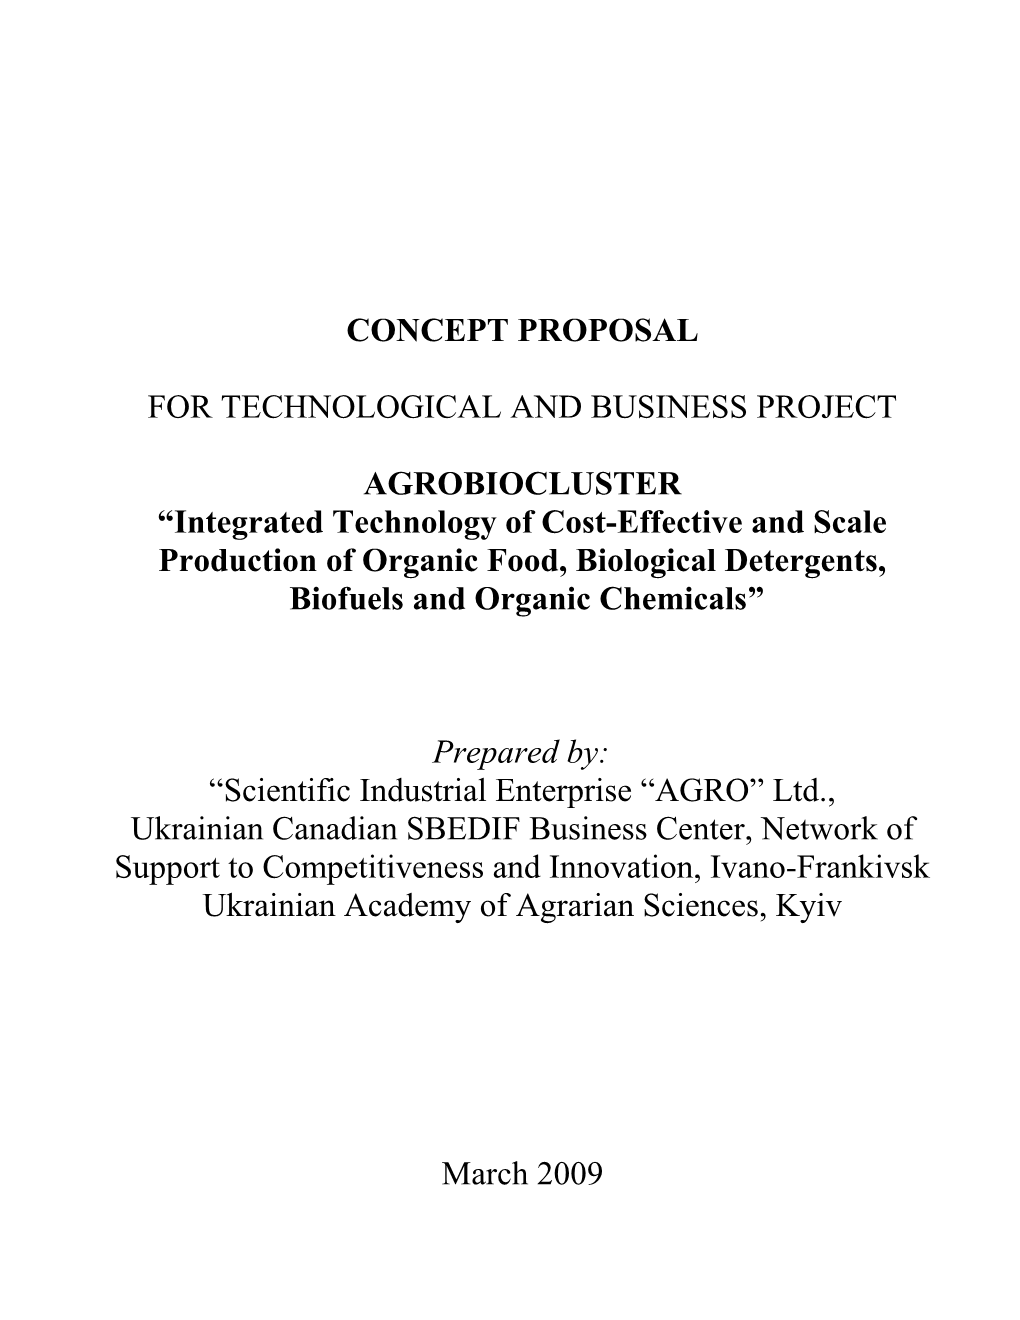 Integrated Technology of Cost-Effective and Scaleproductionof Organic Food,Biological